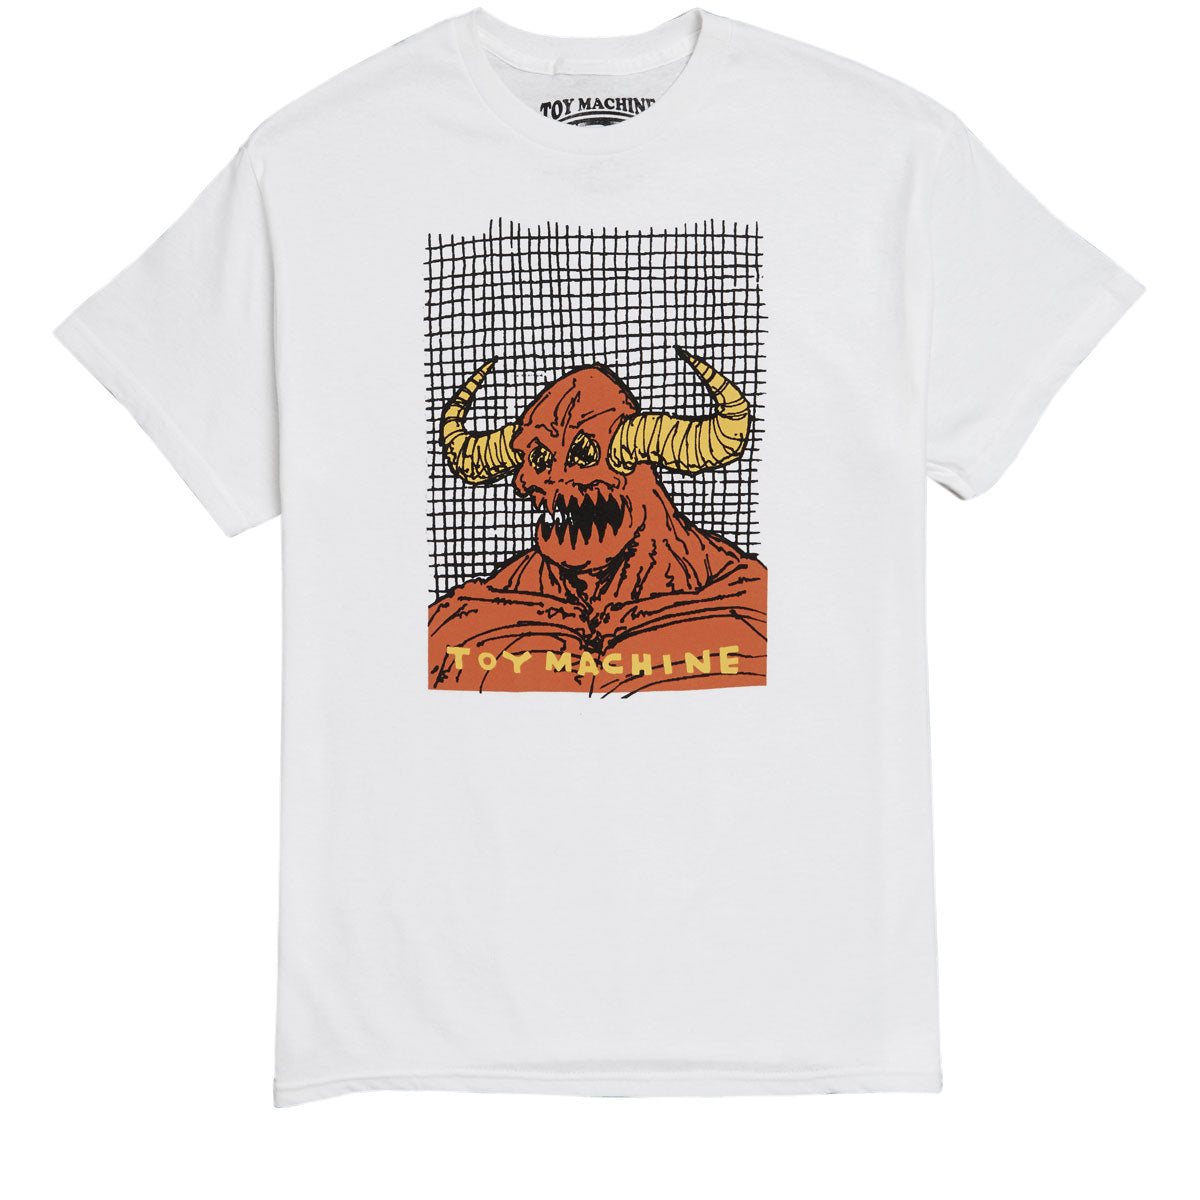 Toy Machine Welcome To Hell Monster T-Shirt - White image 1